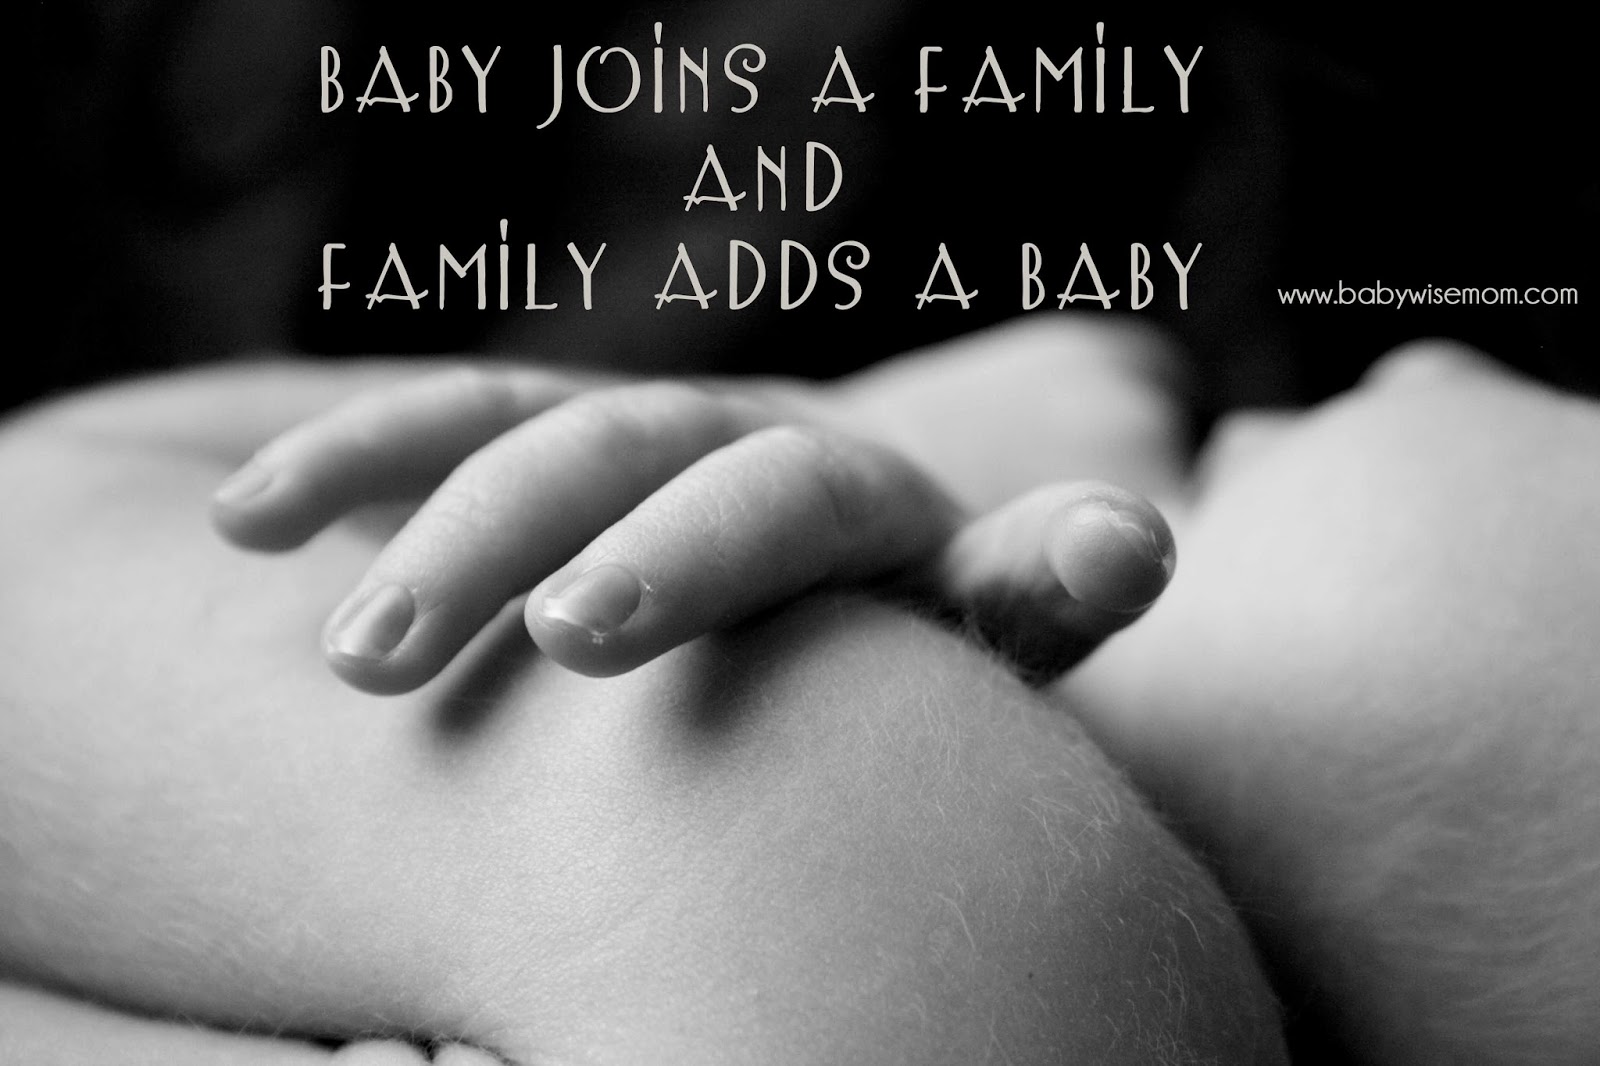 Baby Joins a Family {AND} Family Adds a Baby - Chronicles of a Babywise Mom1600 x 1066